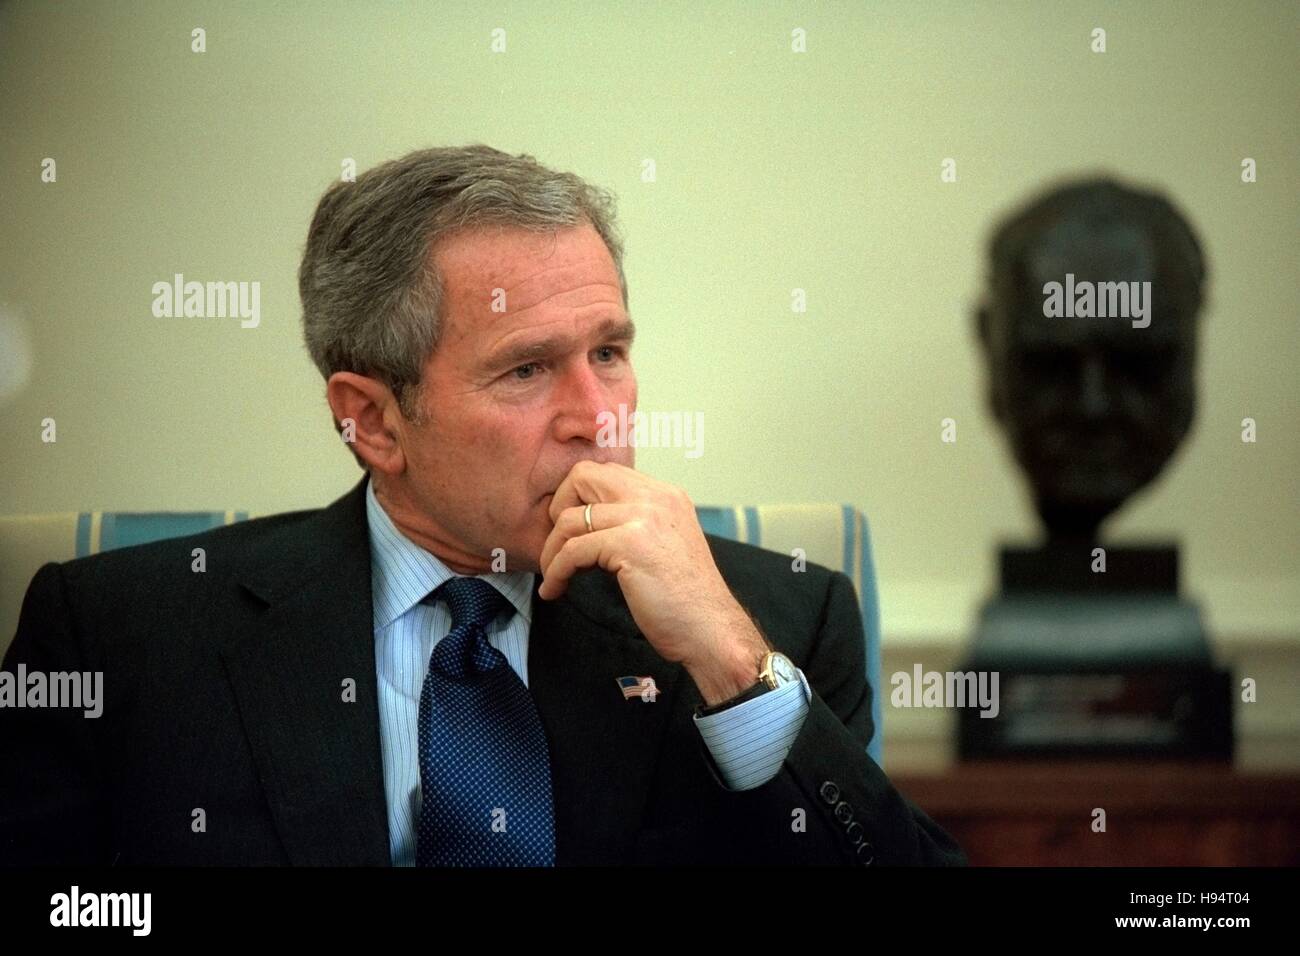 U.S. President George W. Bush pauses during a meeting in the White House Oval Office October 10, 2001 in Washington, DC. Stock Photo